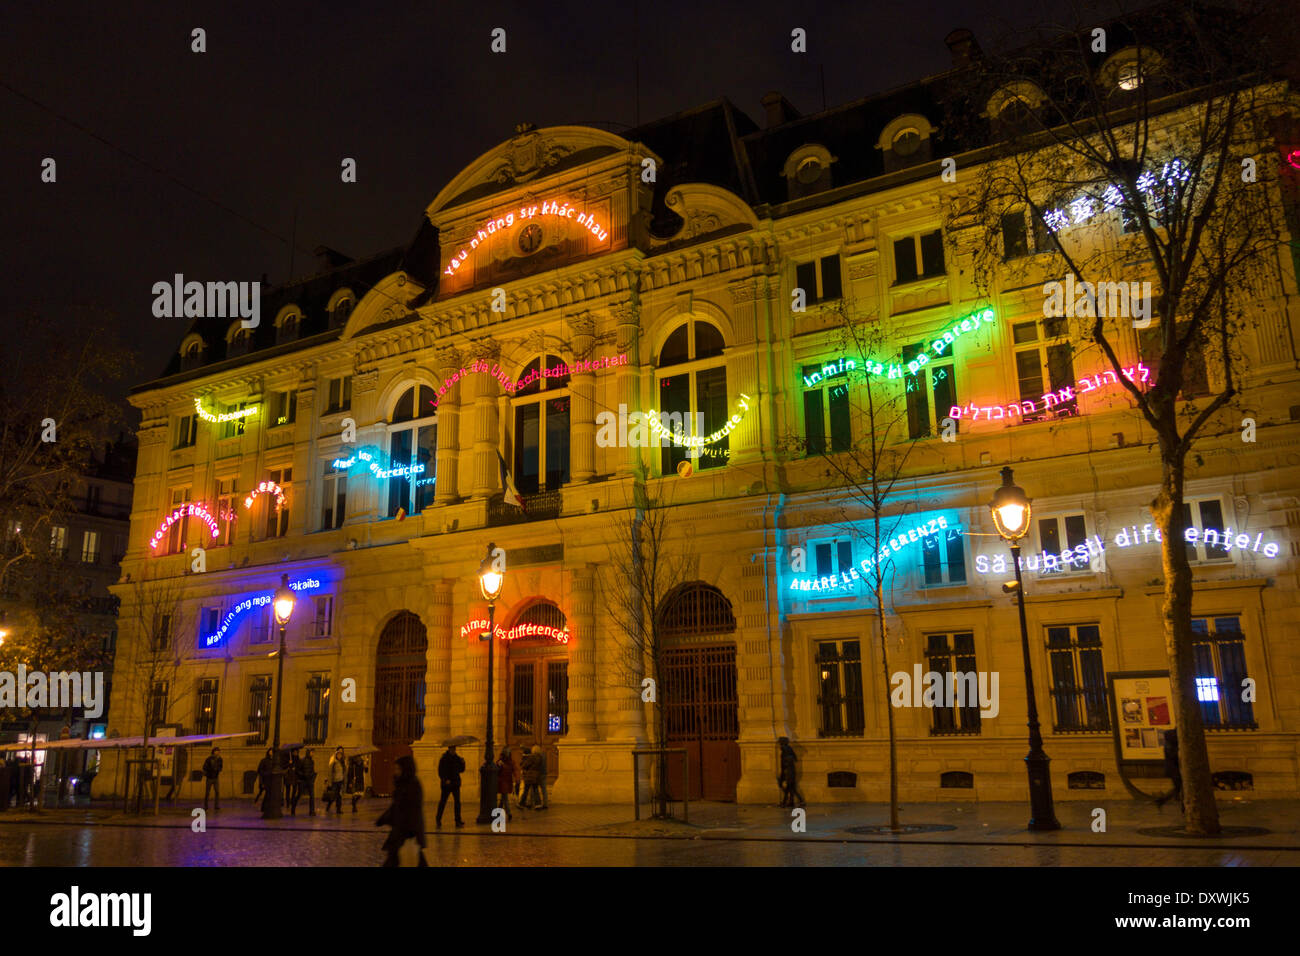 The Mairie of the IVth arrondissement decorated with neon signs in many languages celebrating differences, Paris, France Stock Photo